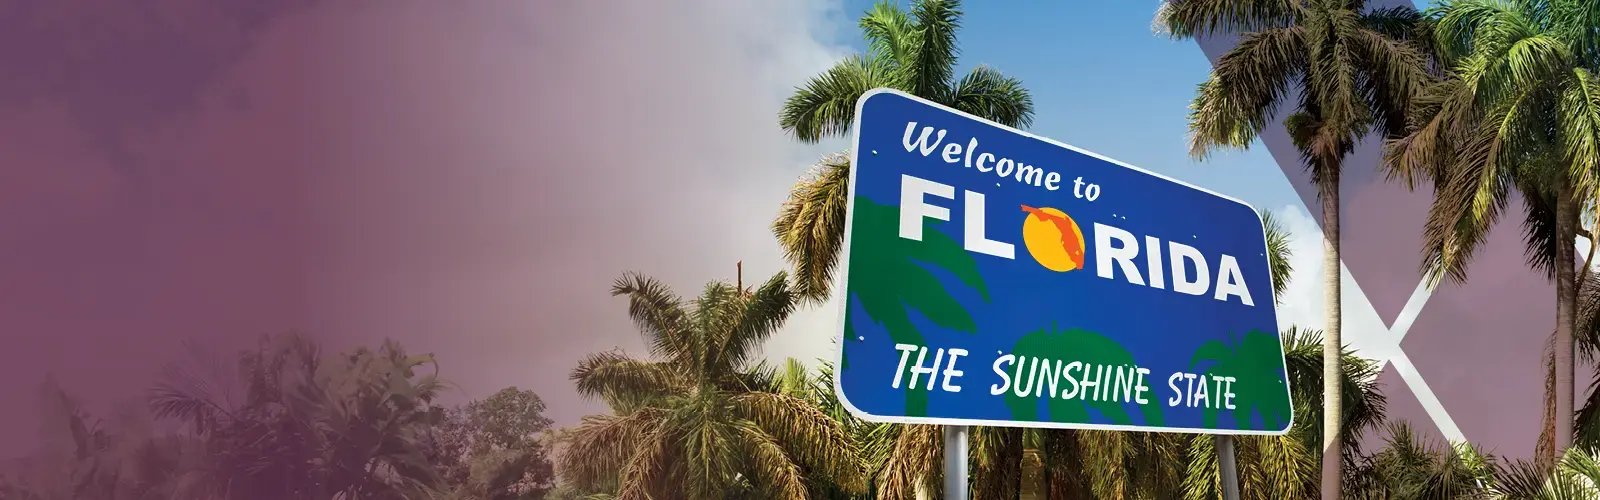 Welcome to Florida, The Sunshine State sign with palm trees 